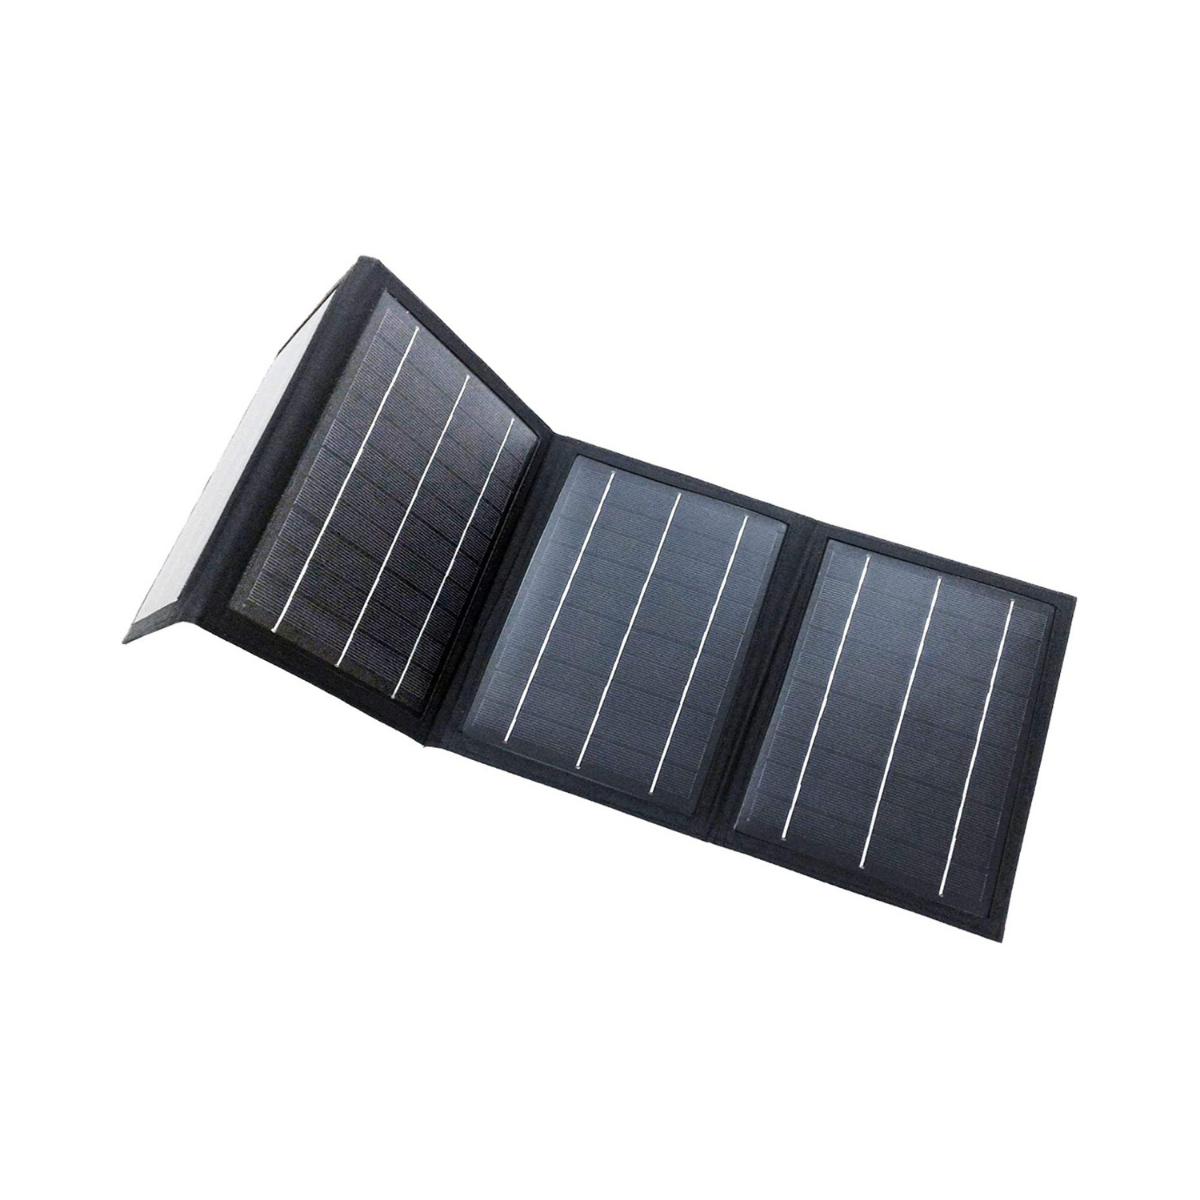 Solar Chargers - Portable Solar Chargers & Large Panels